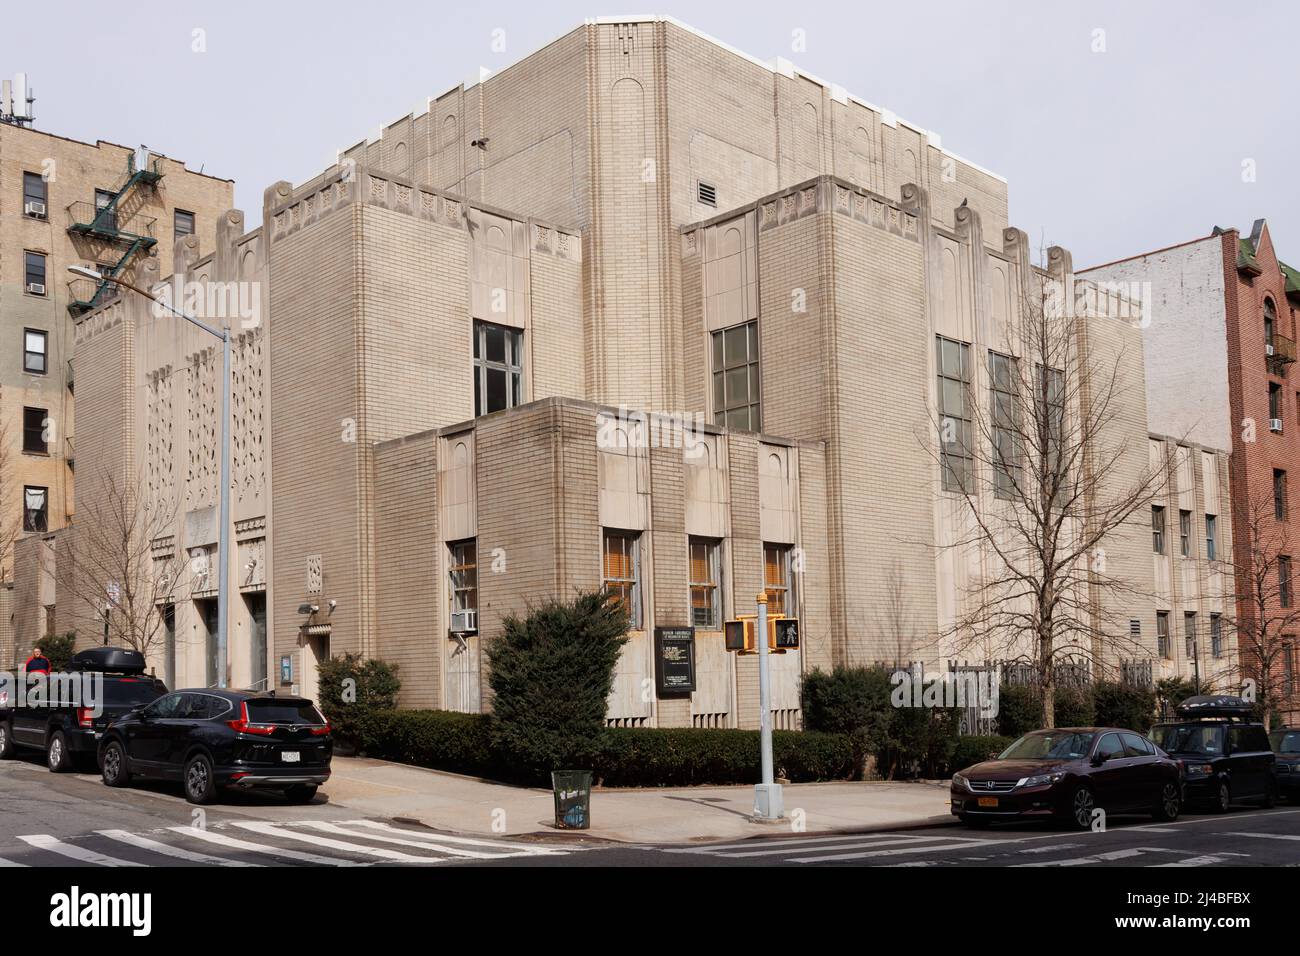 the Hebrew Tabernacle of Washington Heights, a Reform Jewish congregation or synagogue in Northern Manhattan, New York, founded in 1905 Stock Photo